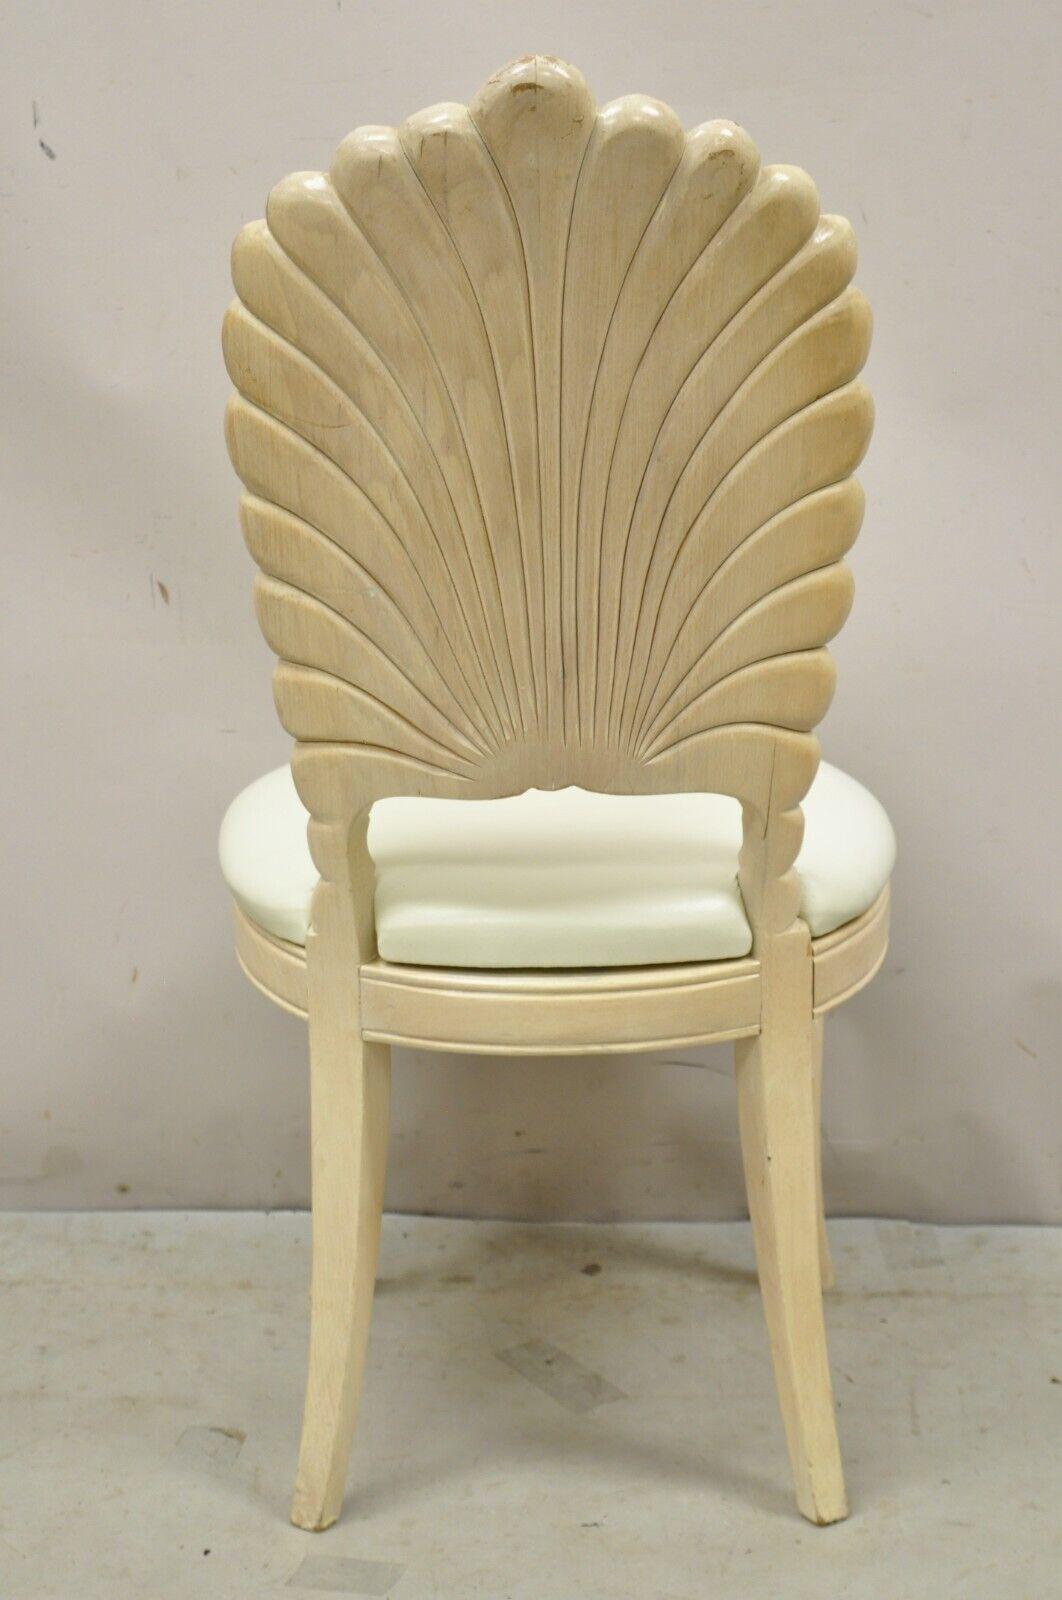 Vintage Hollywood Regency Venetian Grotto Shell Back Dining Chairs - Set of 4 3